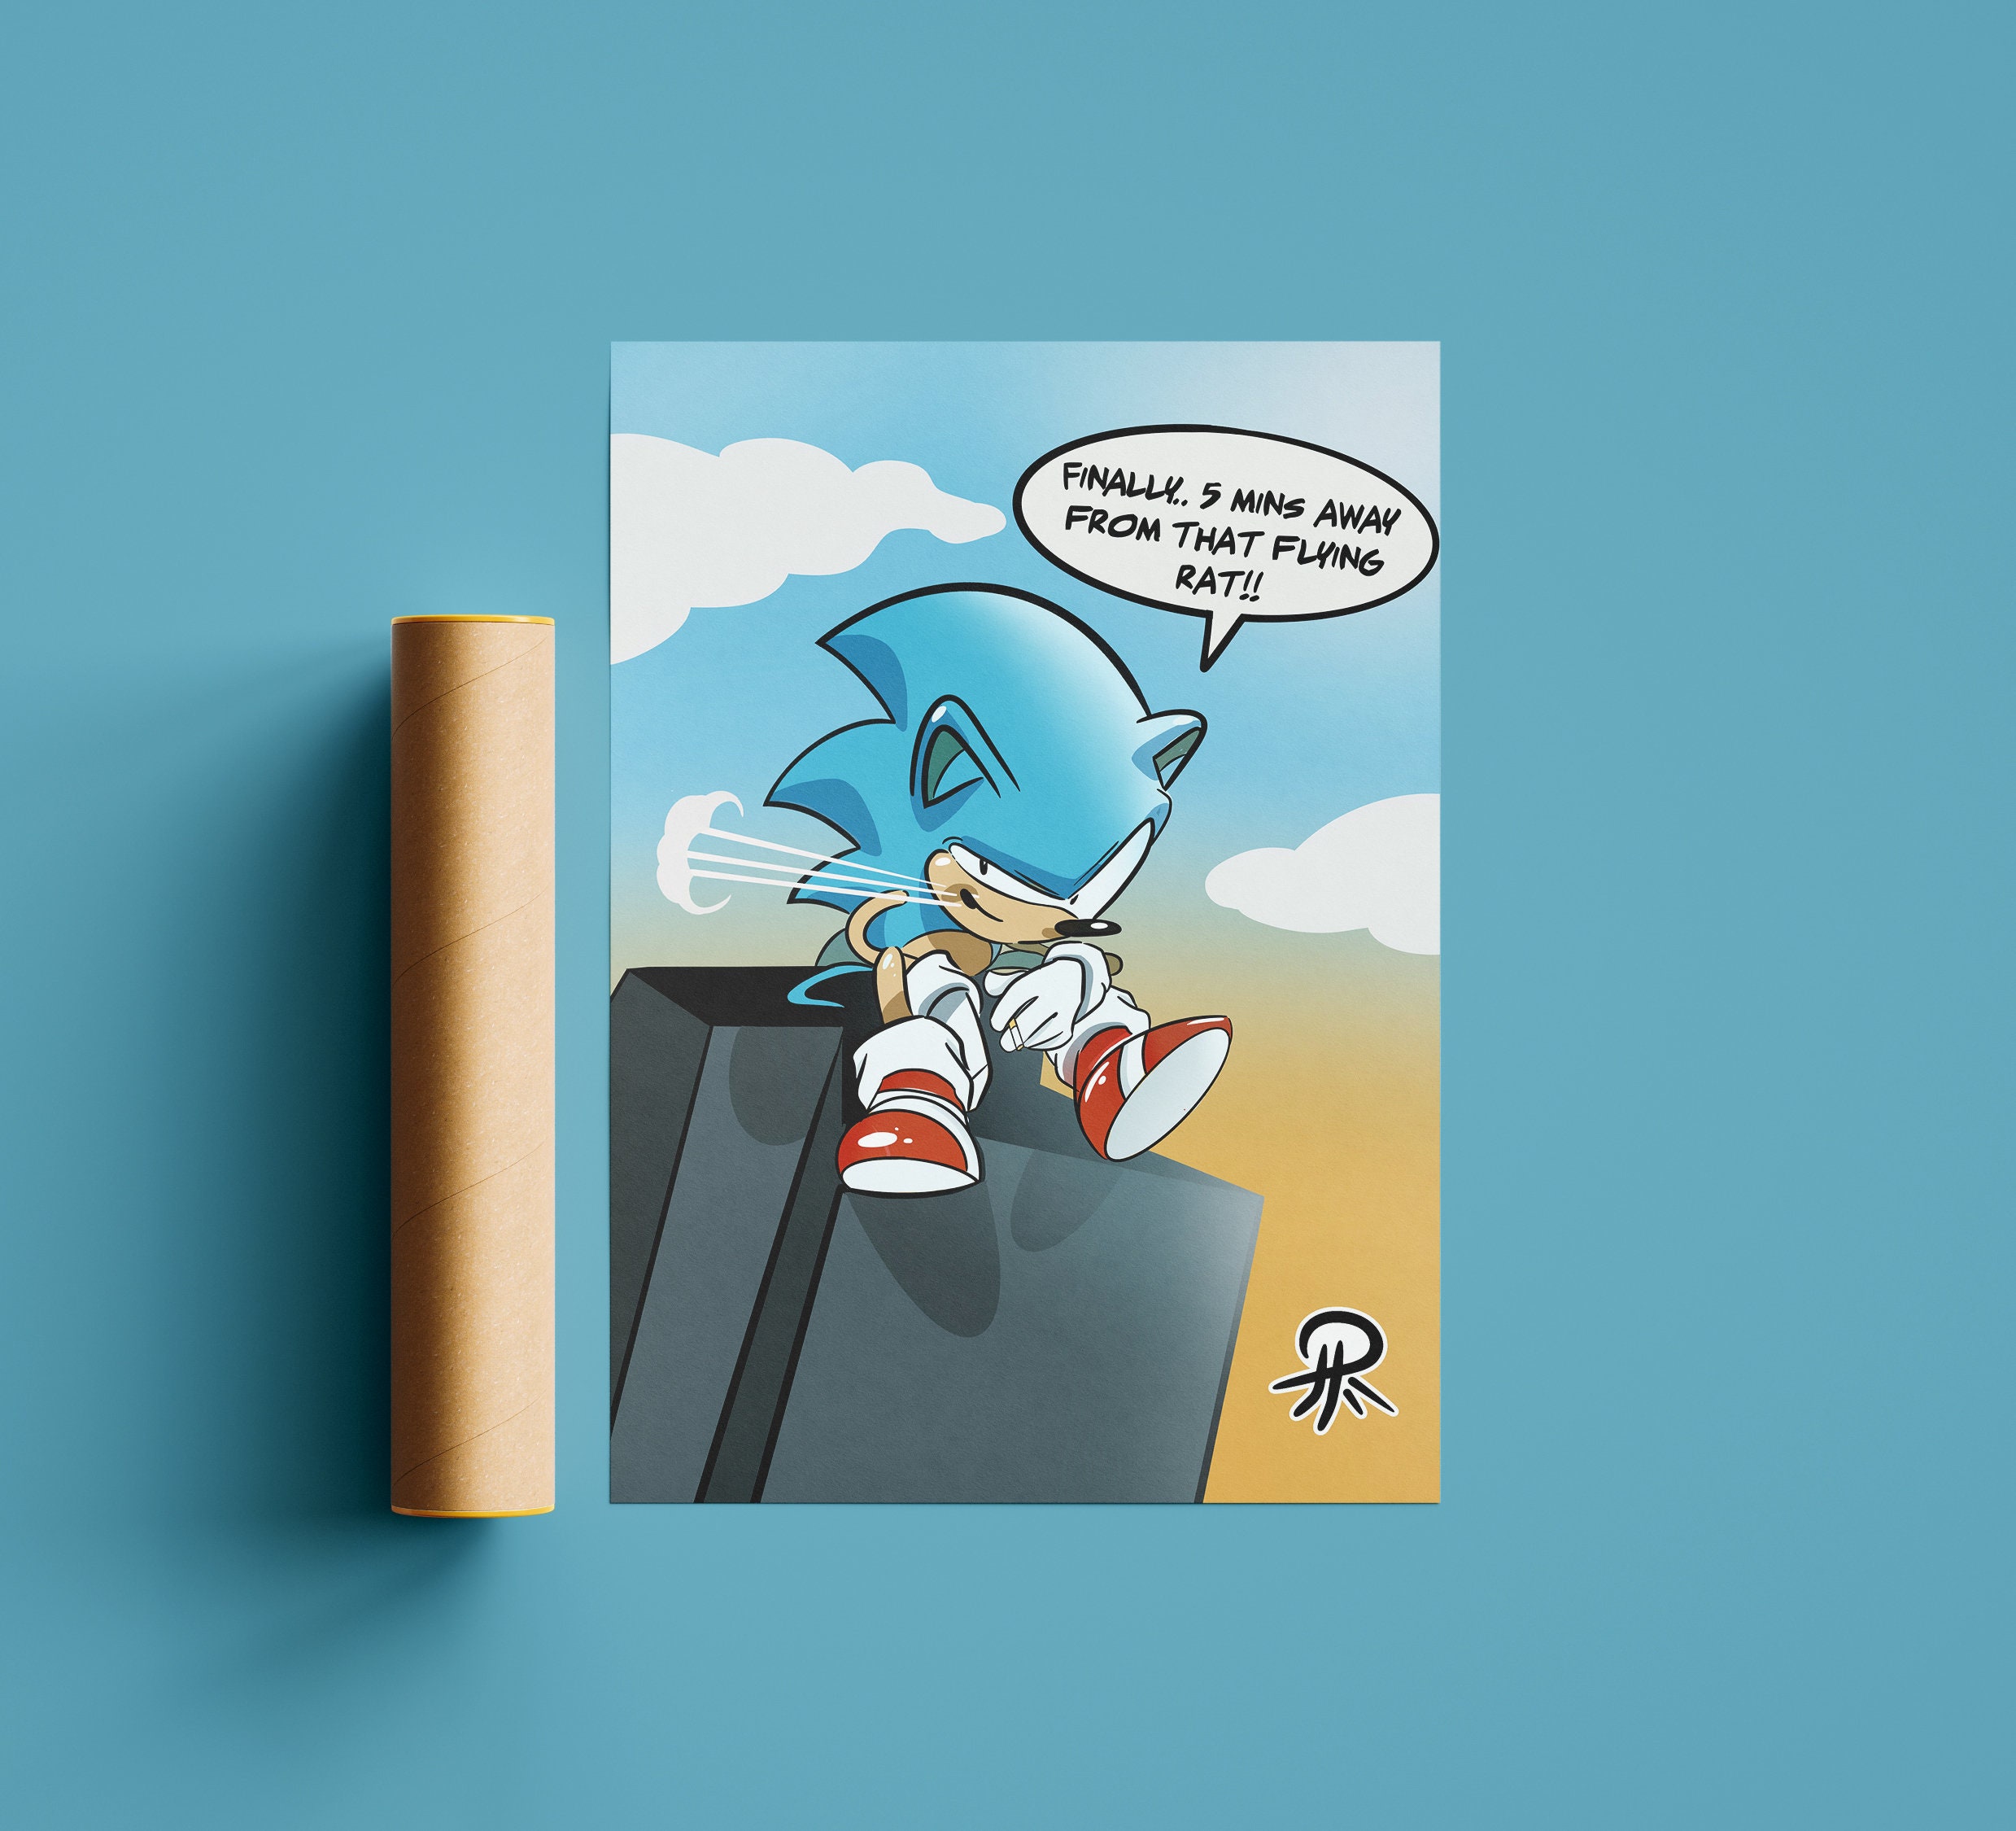 Sonic the Hedgehog 2 Gets Pun-Filled Character Posters